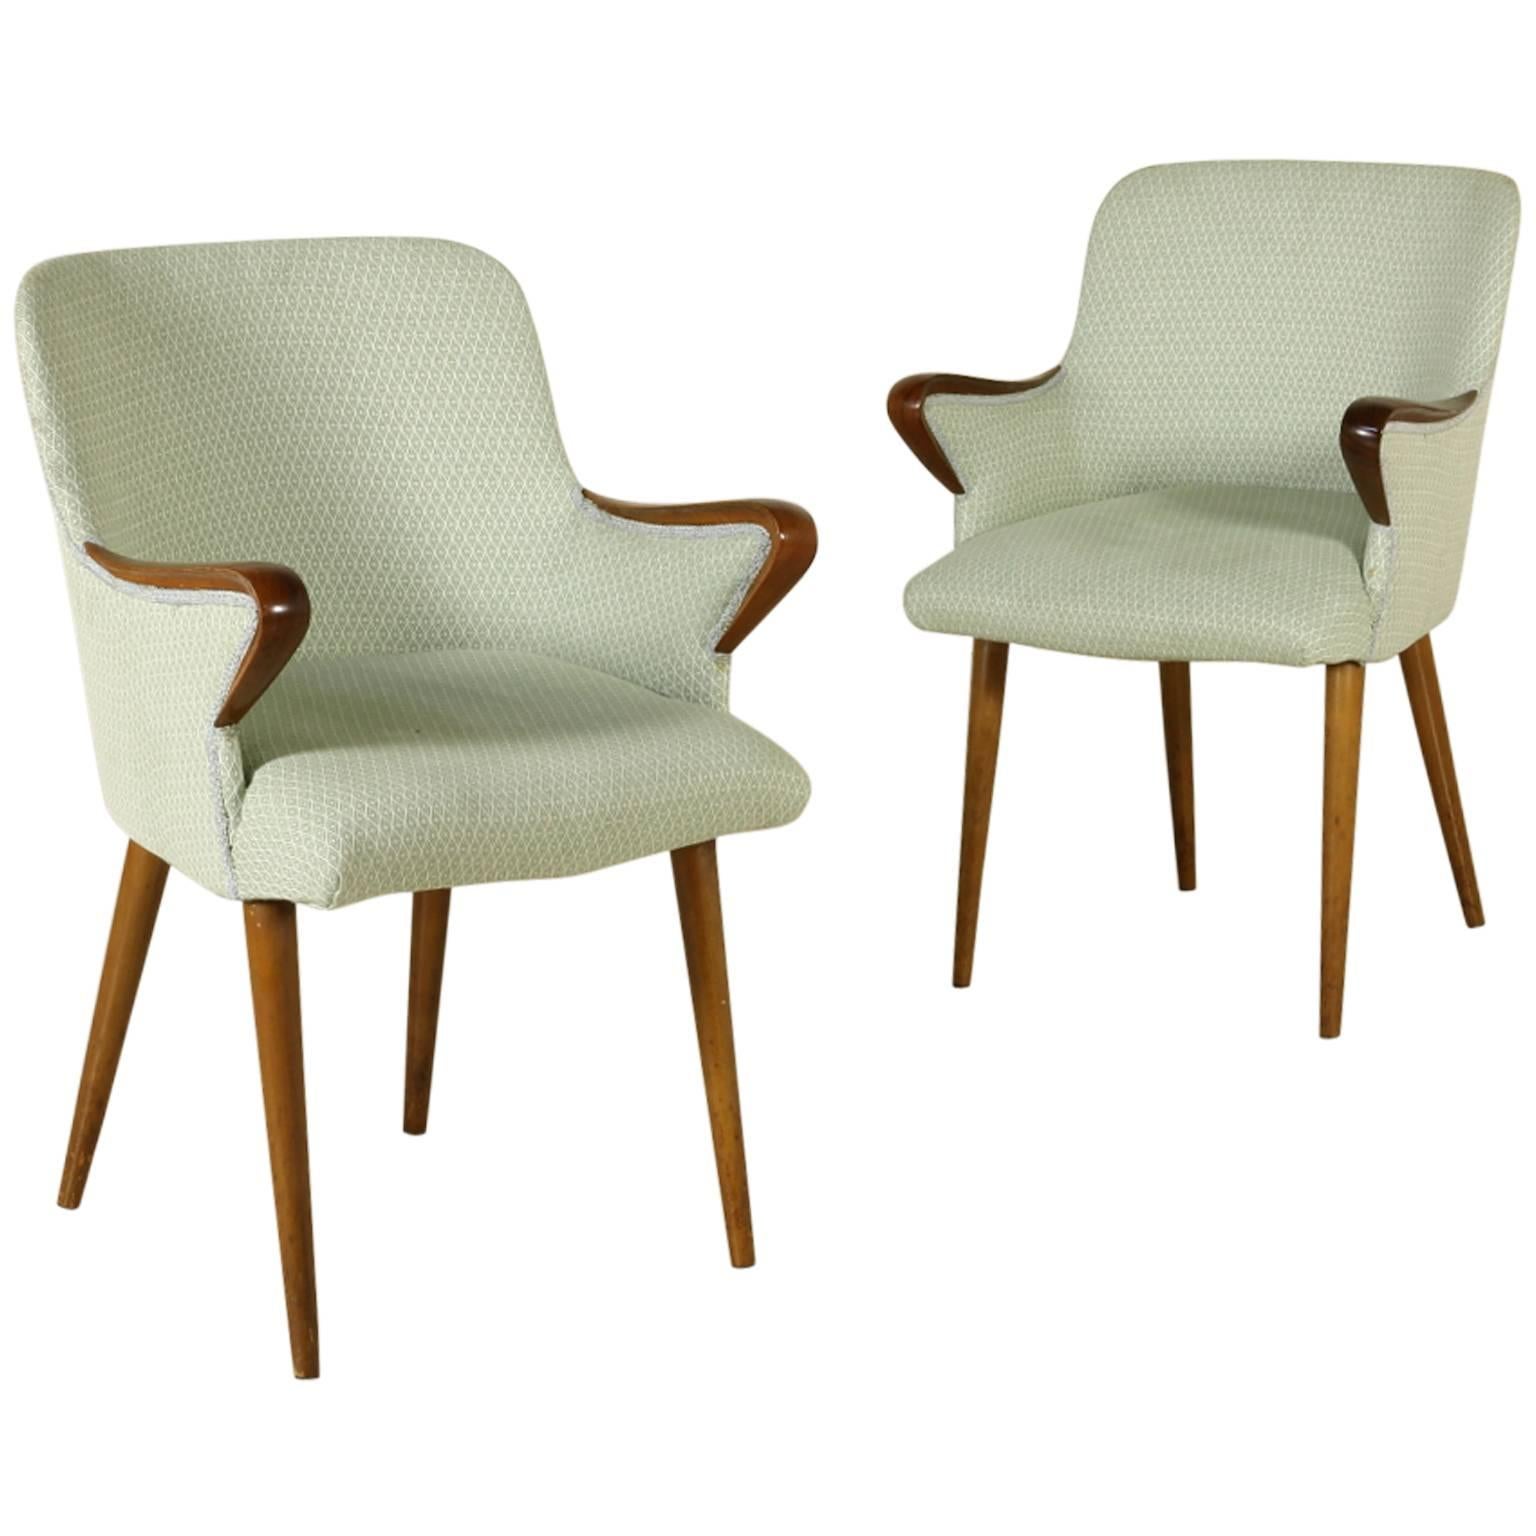 Two Chairs by Osvaldo Borsani for Tecno Foam Fabric Stained Beech Vintage, 1950s